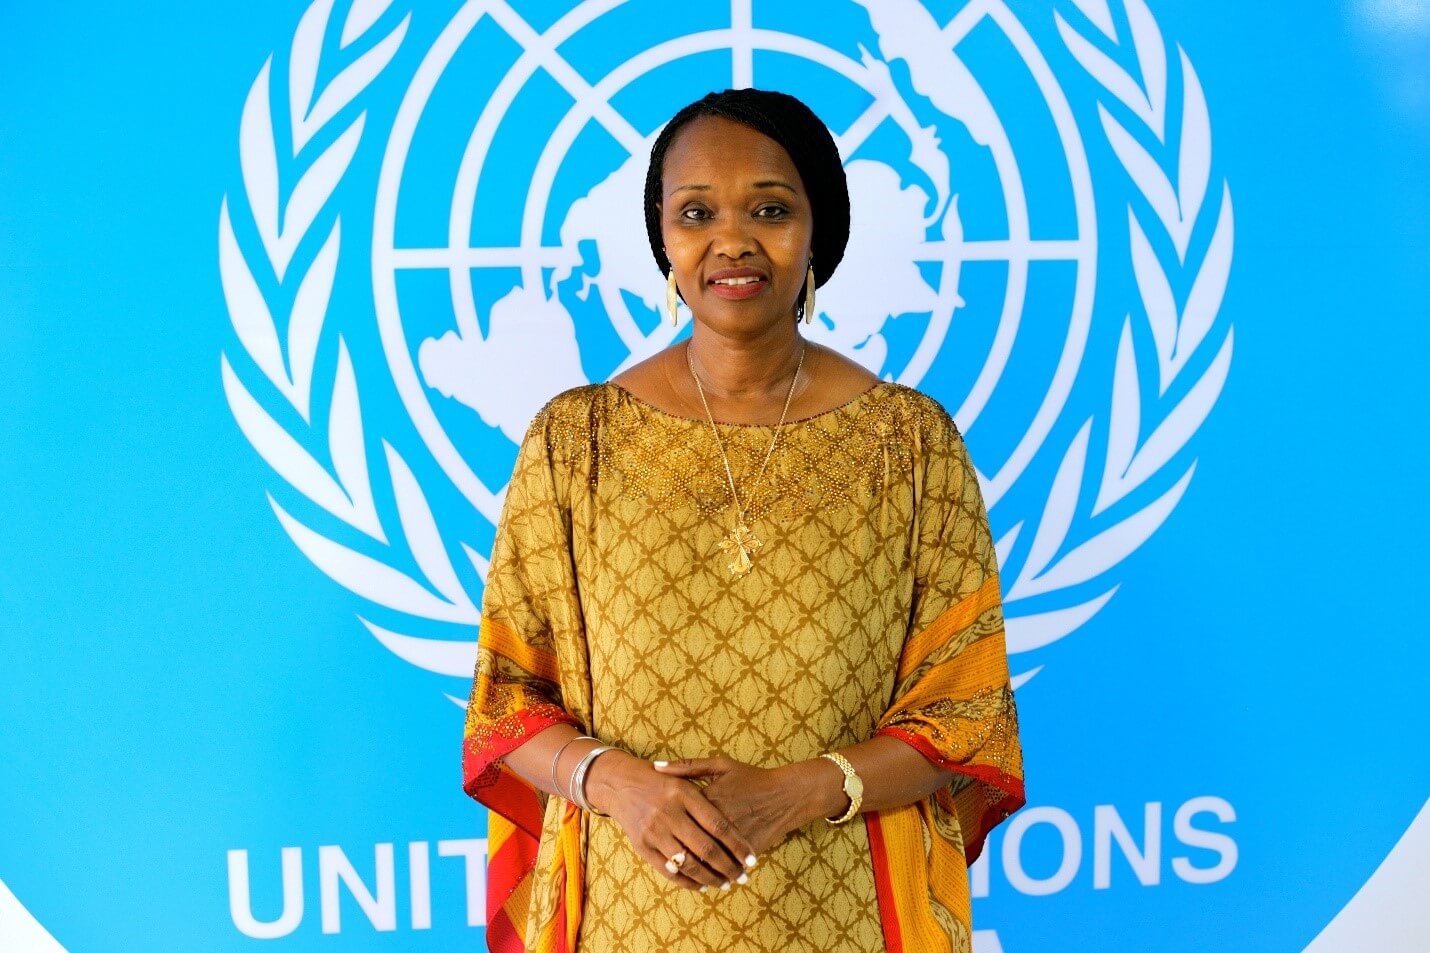 MS. CHRISTINE N. UMUTONI - Newly Appointed United Nations Resident Coordinator in Liberia - African Leaders Magazine 